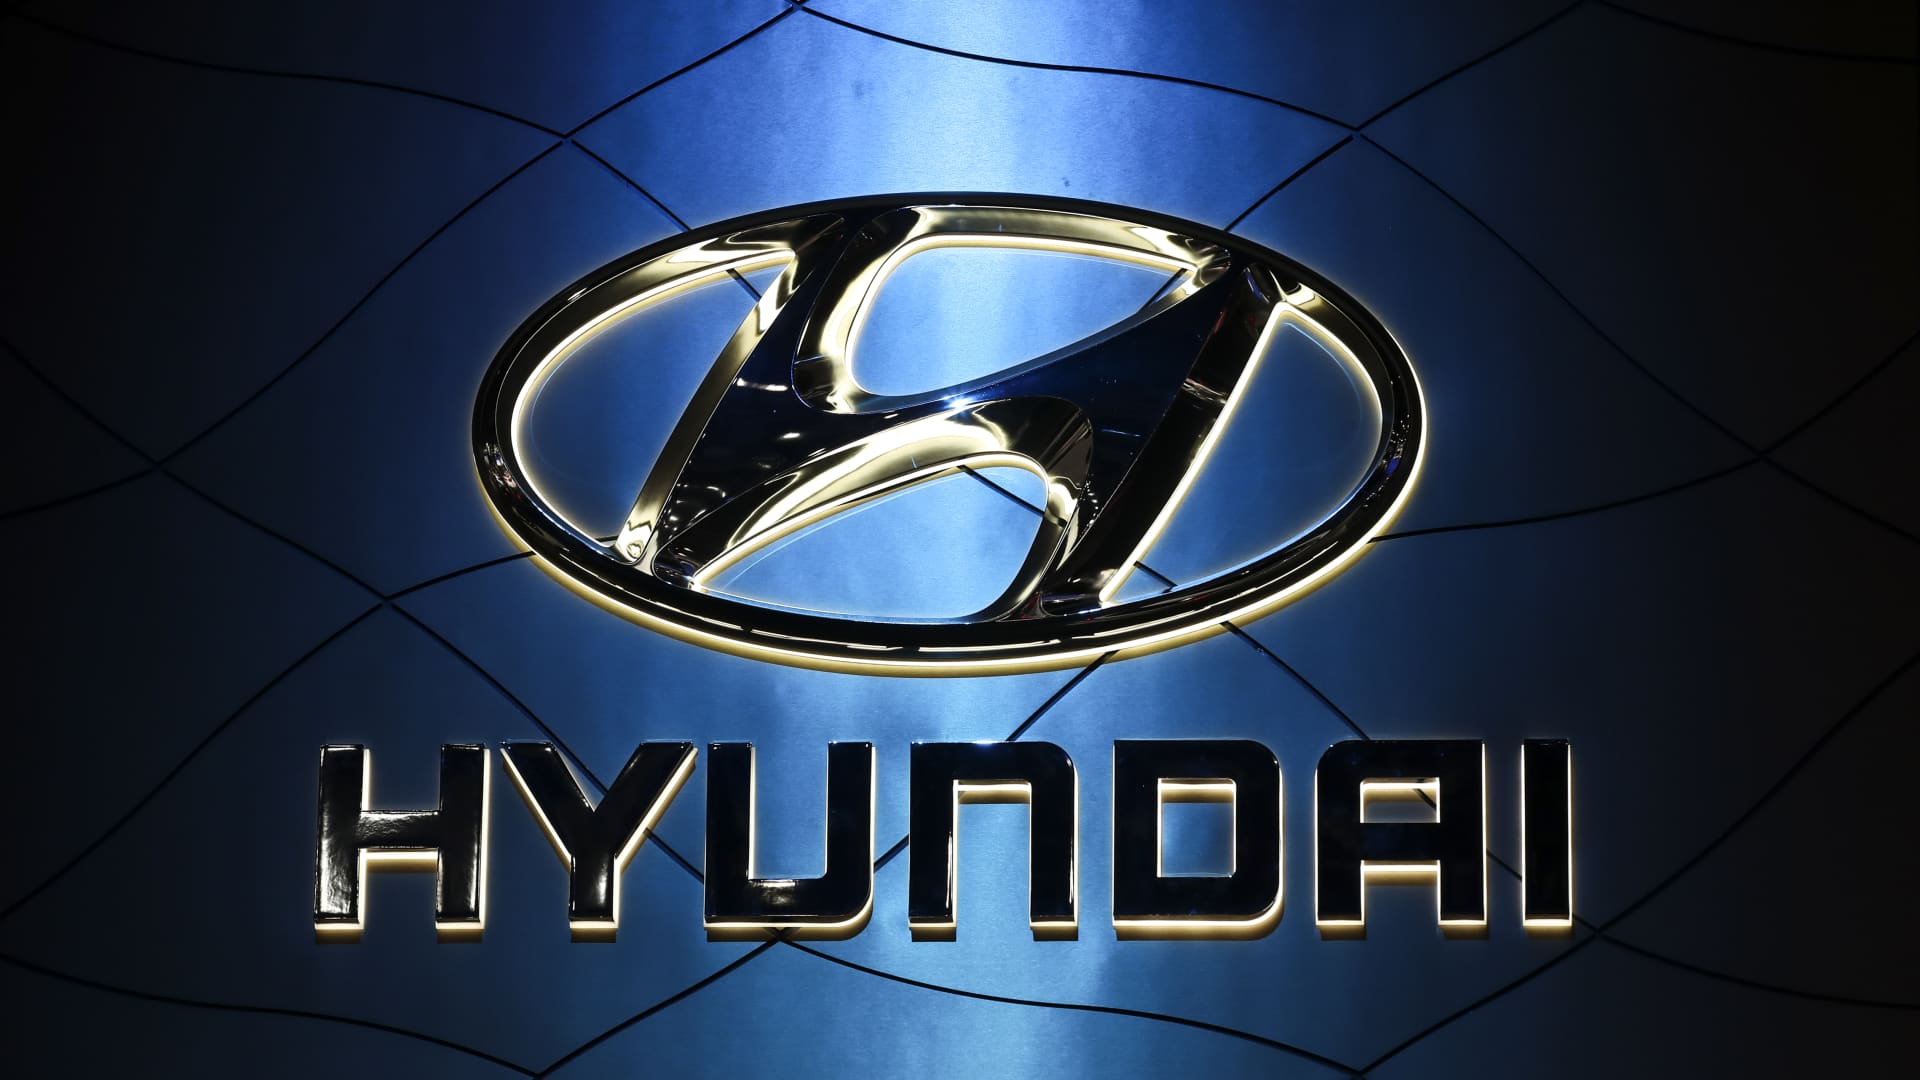 Hyundai plans $5 billion investment in U.S. on mobility technology